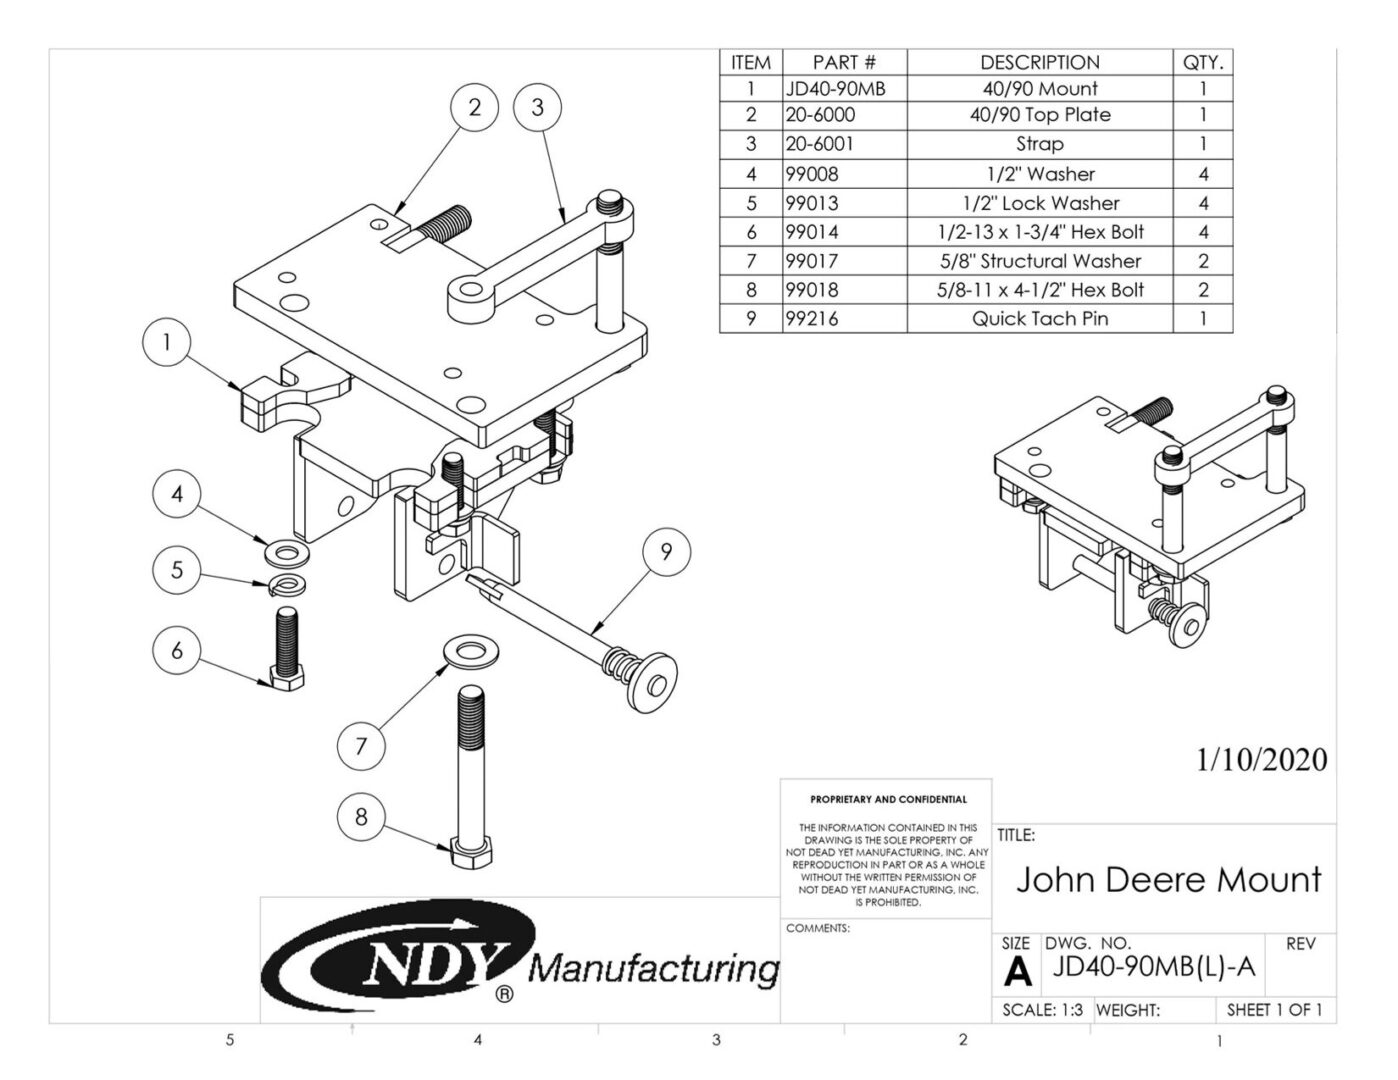 A diagram showing the parts of a Stalk Stomper Mount Assembly, Left, for John Deere 40/90 Series Corn Head.